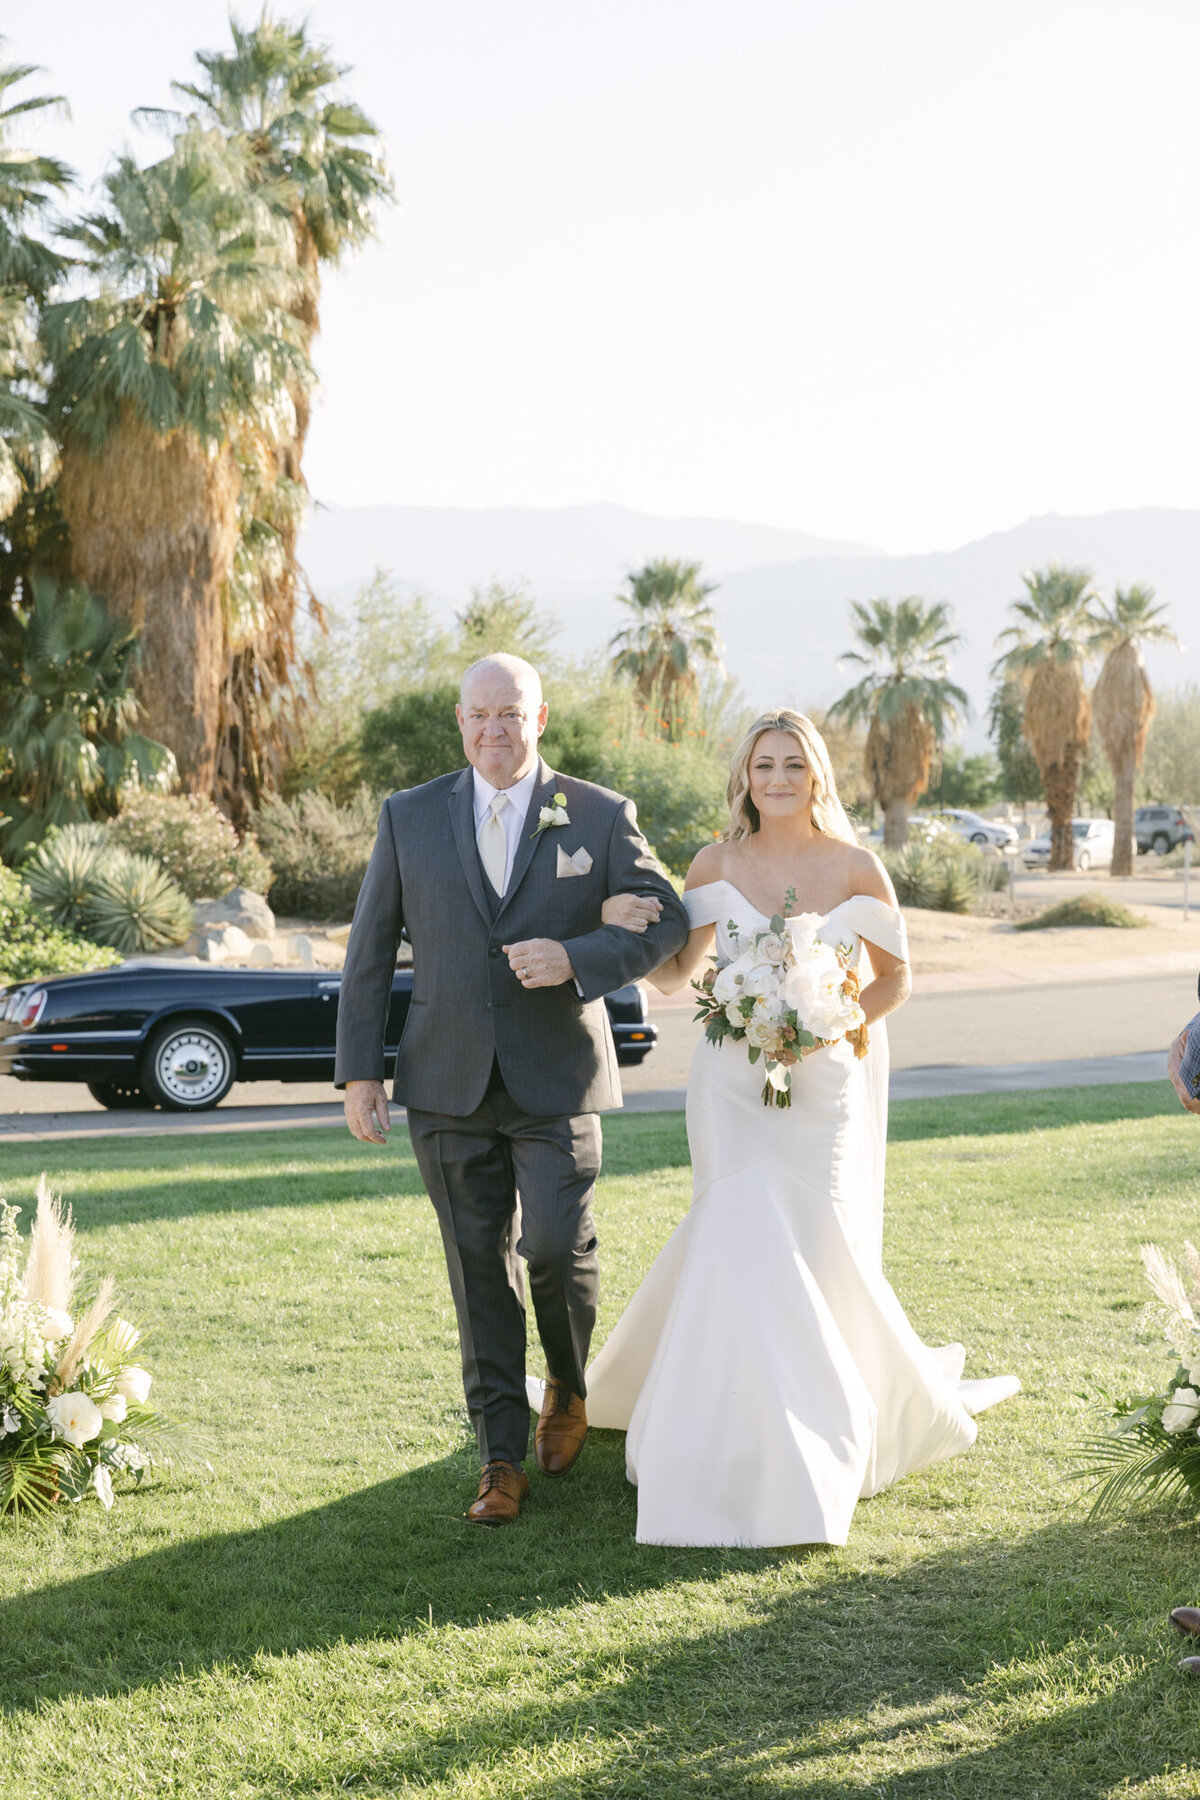 PERRUCCIPHOTO_DESERT_WILLOW_PALM_SPRINGS_WEDDING58